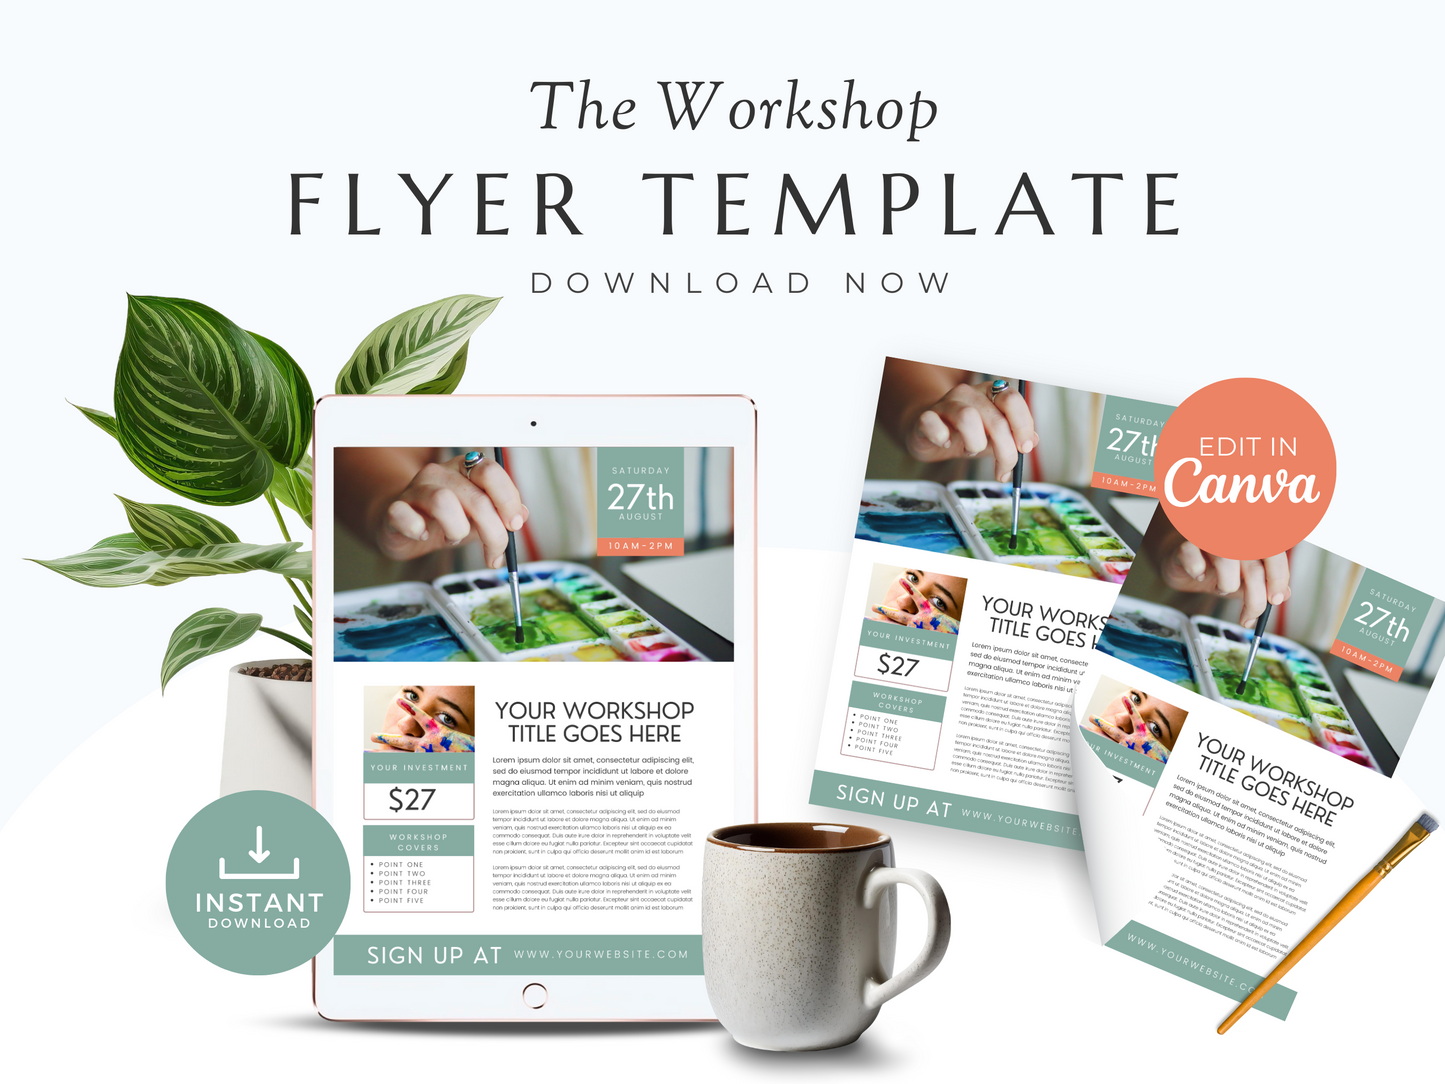 The Workshop Flyer Template